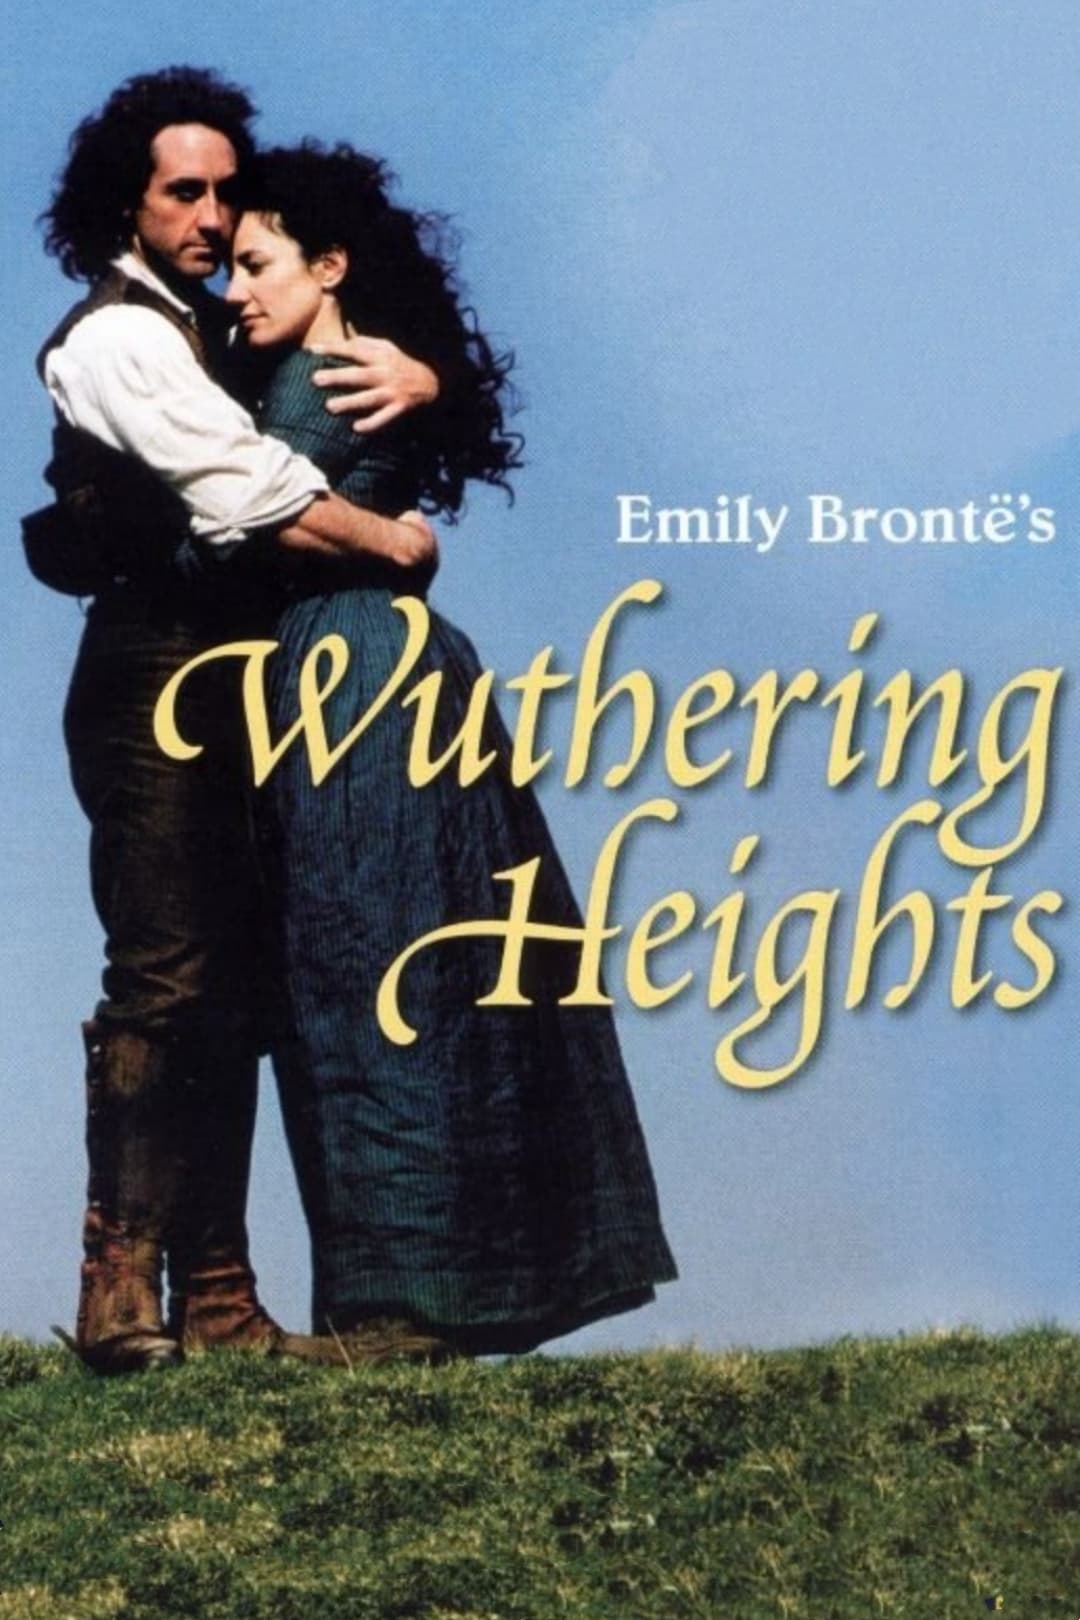 Emily Brontë's Sturmhöhe - Wuthering Heights (1998)